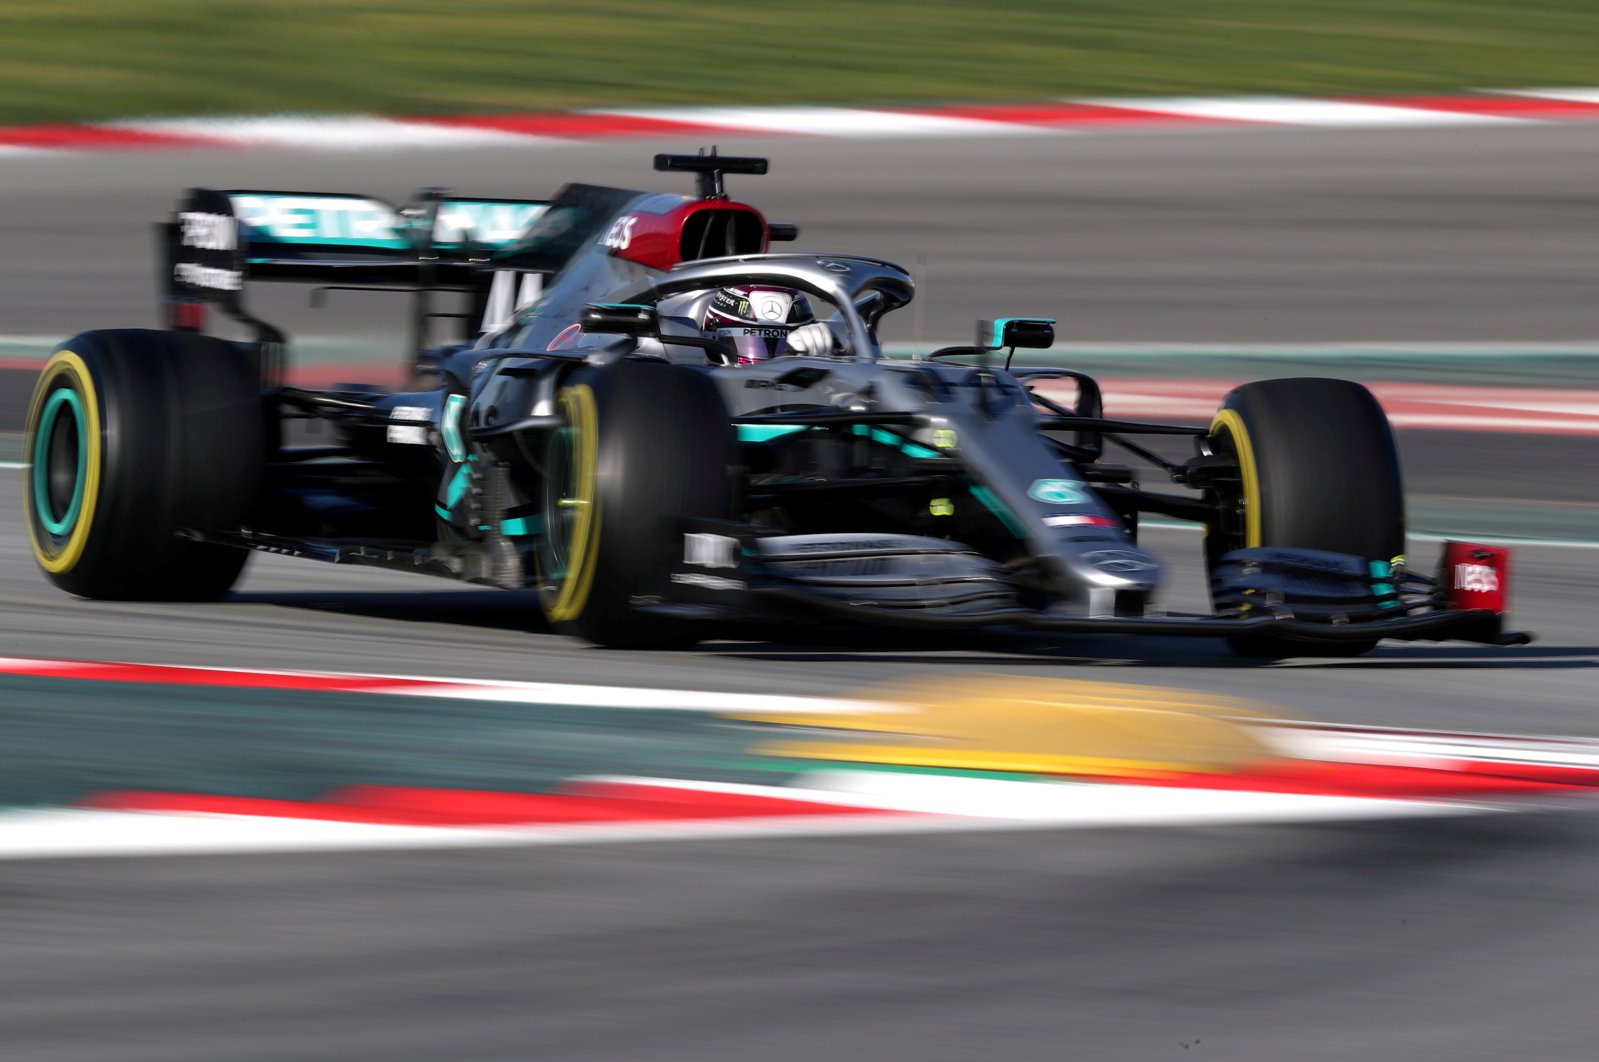 Mercedes' Lewis Hamilton in action during pre-season testing in Barcelona, Spain, Feb. 28, 2020. (Reuters Photo)